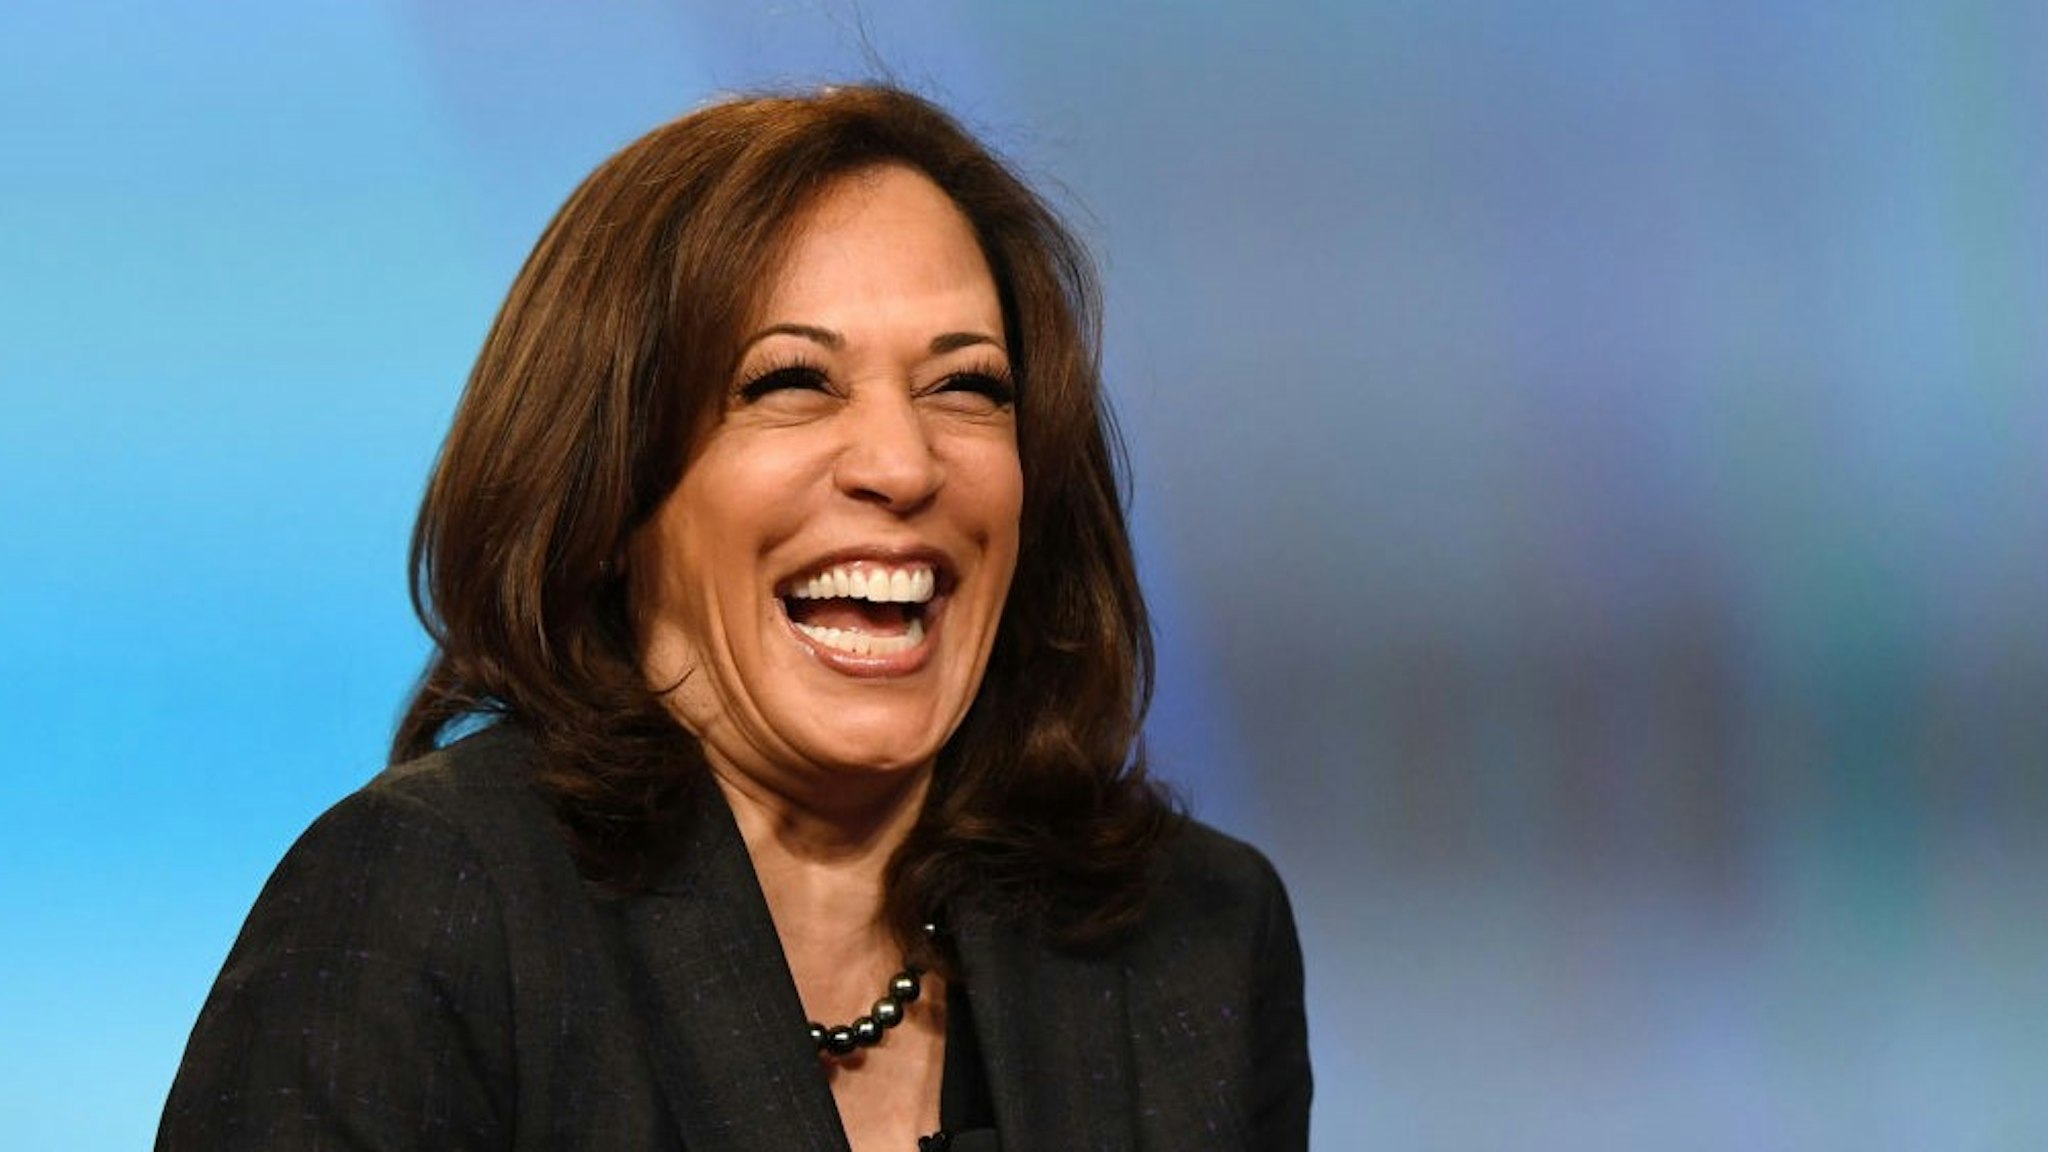 LAS VEGAS, NEVADA - MARCH 01: U.S. Sen. Kamala Harris (D-CA) laughs while speaking at the "Conversations that Count" event during the Black Enterprise Women of Power Summit at The Mirage Hotel &amp; Casino on March 1, 2019 in Las Vegas, Nevada. Harris is campaigning for the 2020 Democratic nomination for president. (Photo by